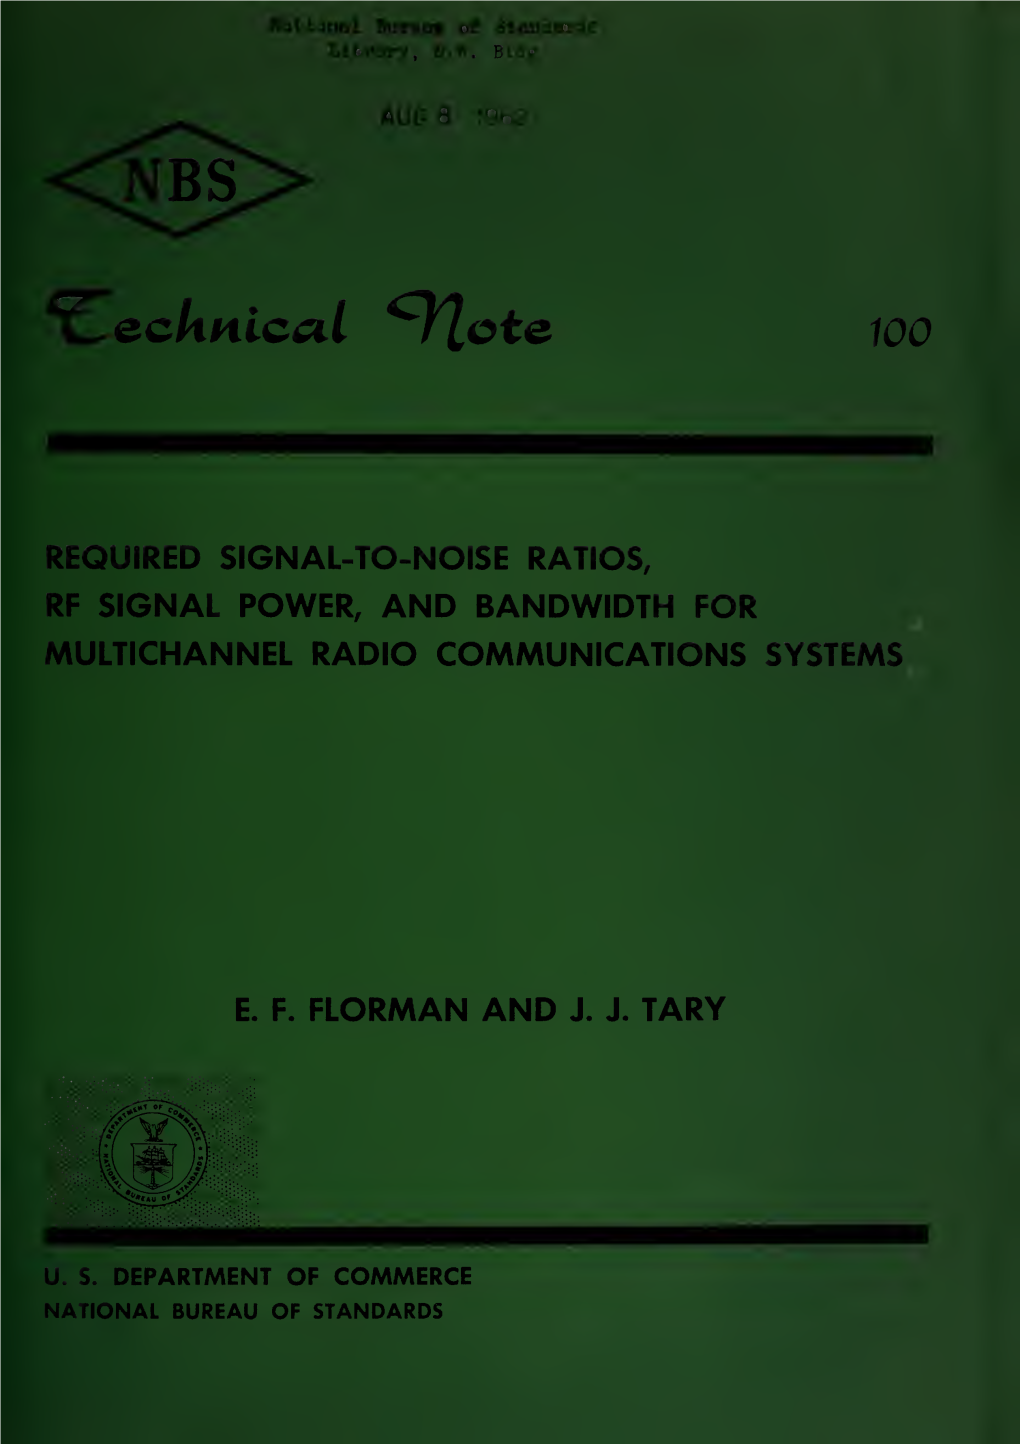 Required Signal-To-Noise Ratios, Rf Signal Power, and Bandwidth for Multichannel Radio Communications Systems